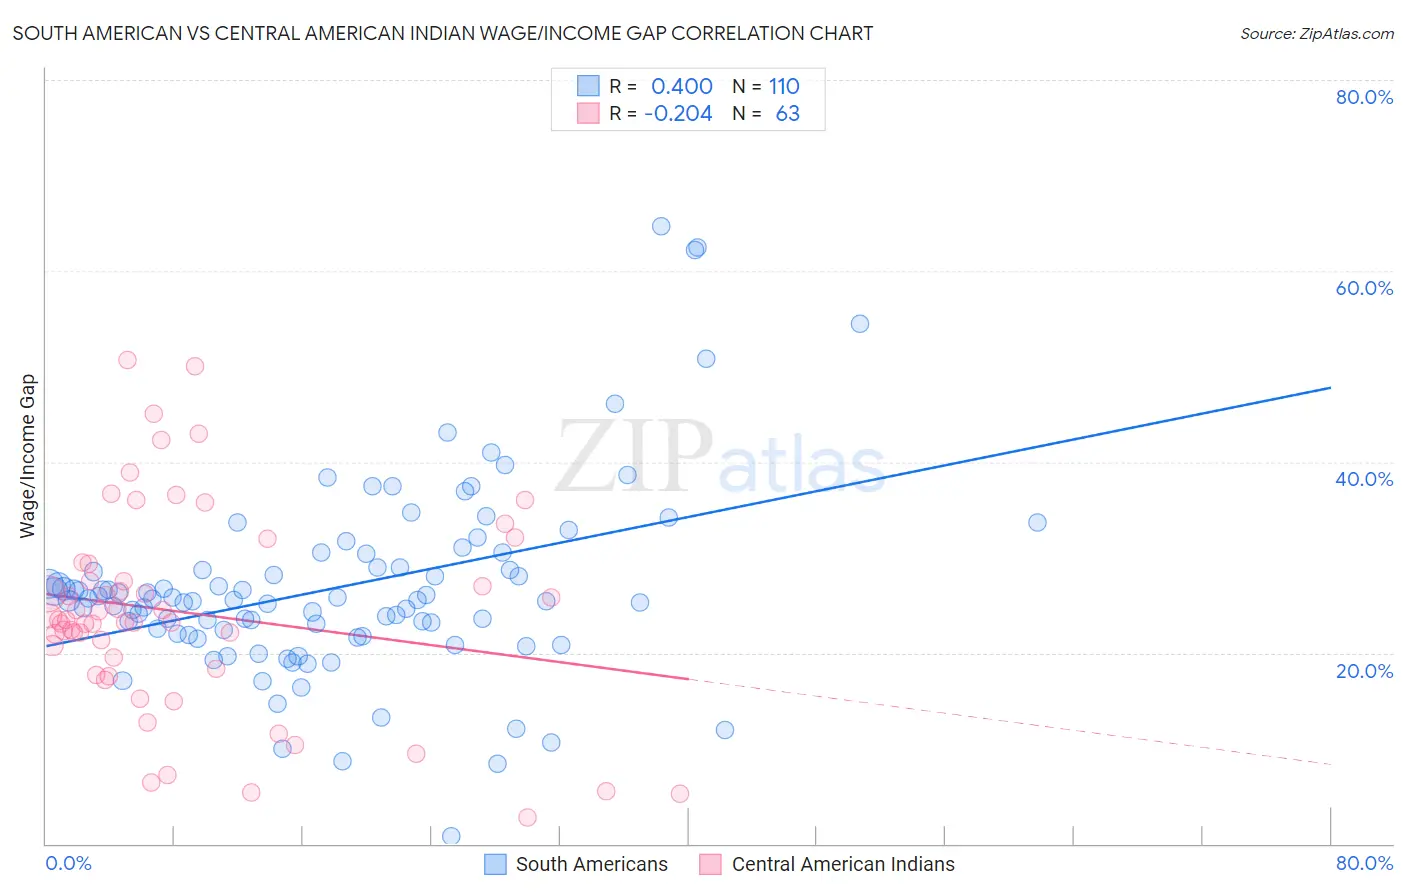 South American vs Central American Indian Wage/Income Gap